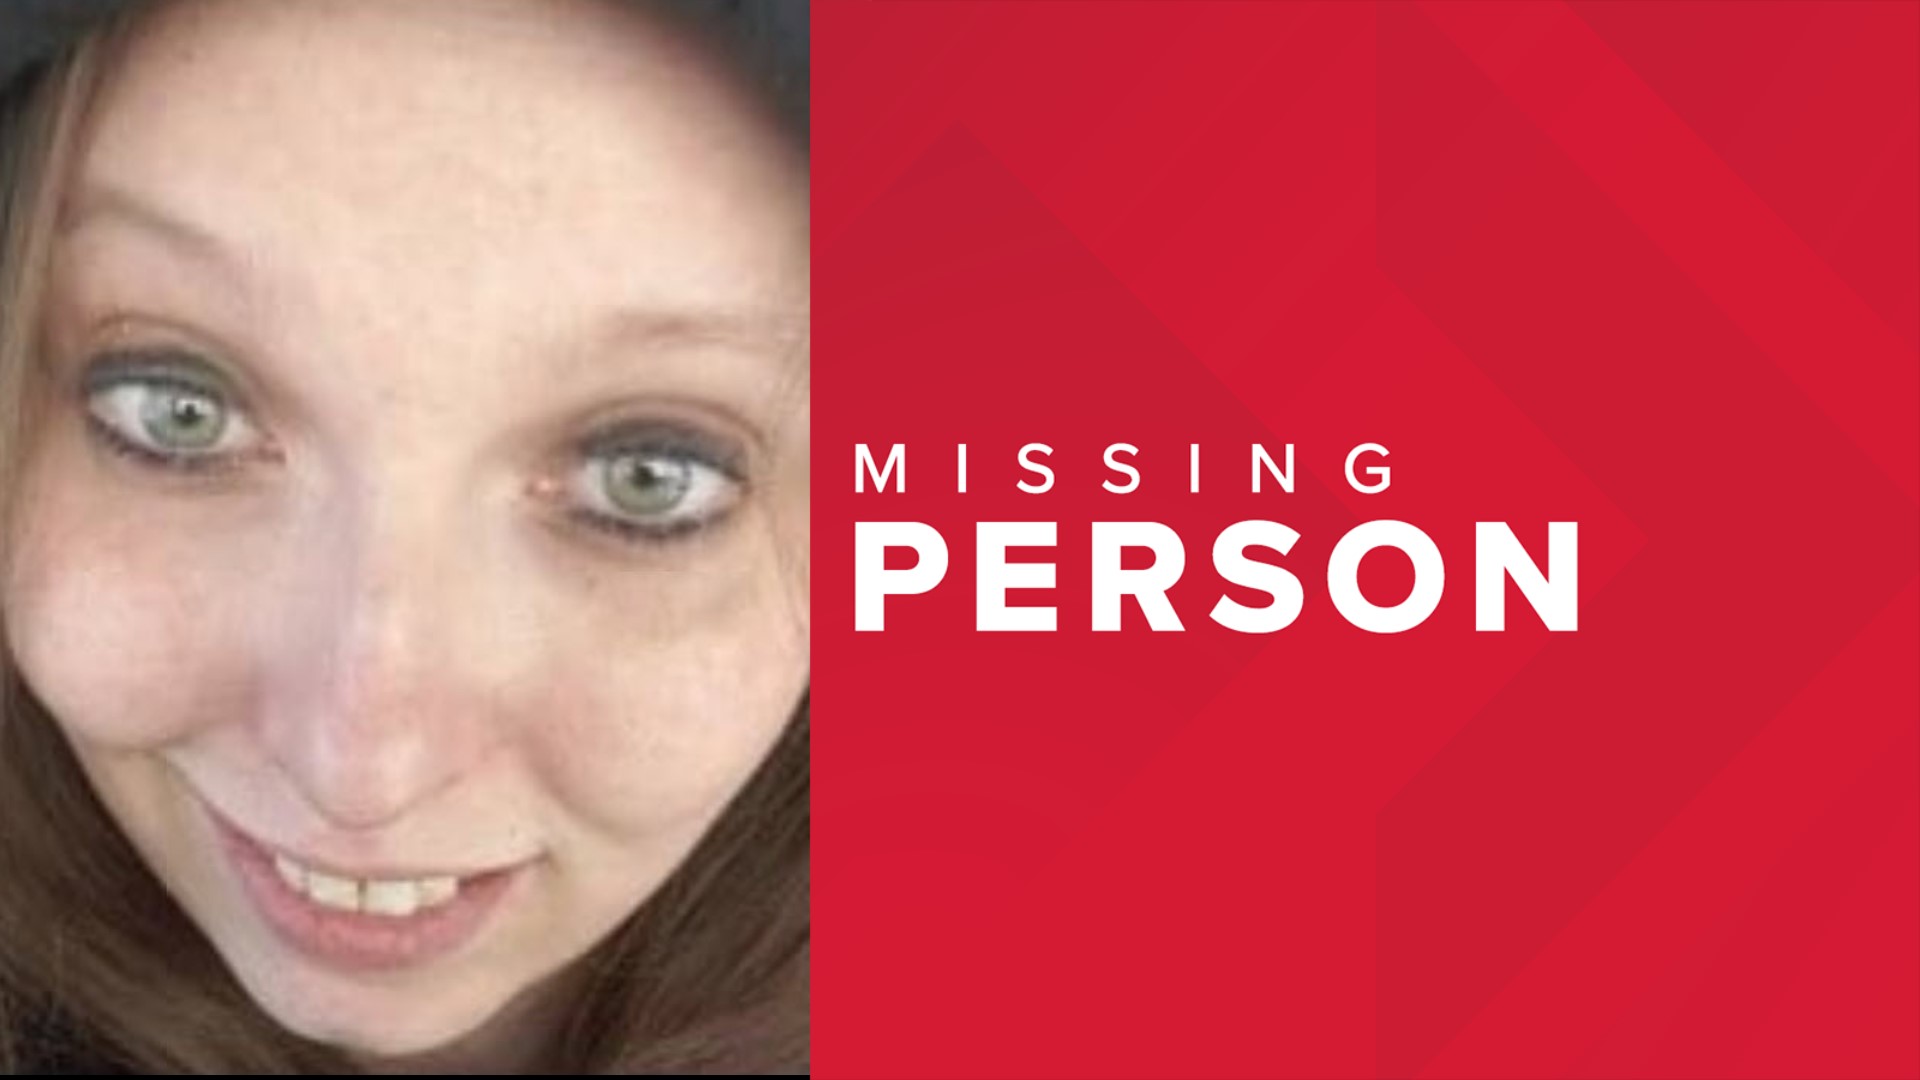 Amber Eichner last was seen around April 14 and her cell phone last pinged off a tower in Tennessee. Ohio BCI was at her home Monday as part of the investigation.